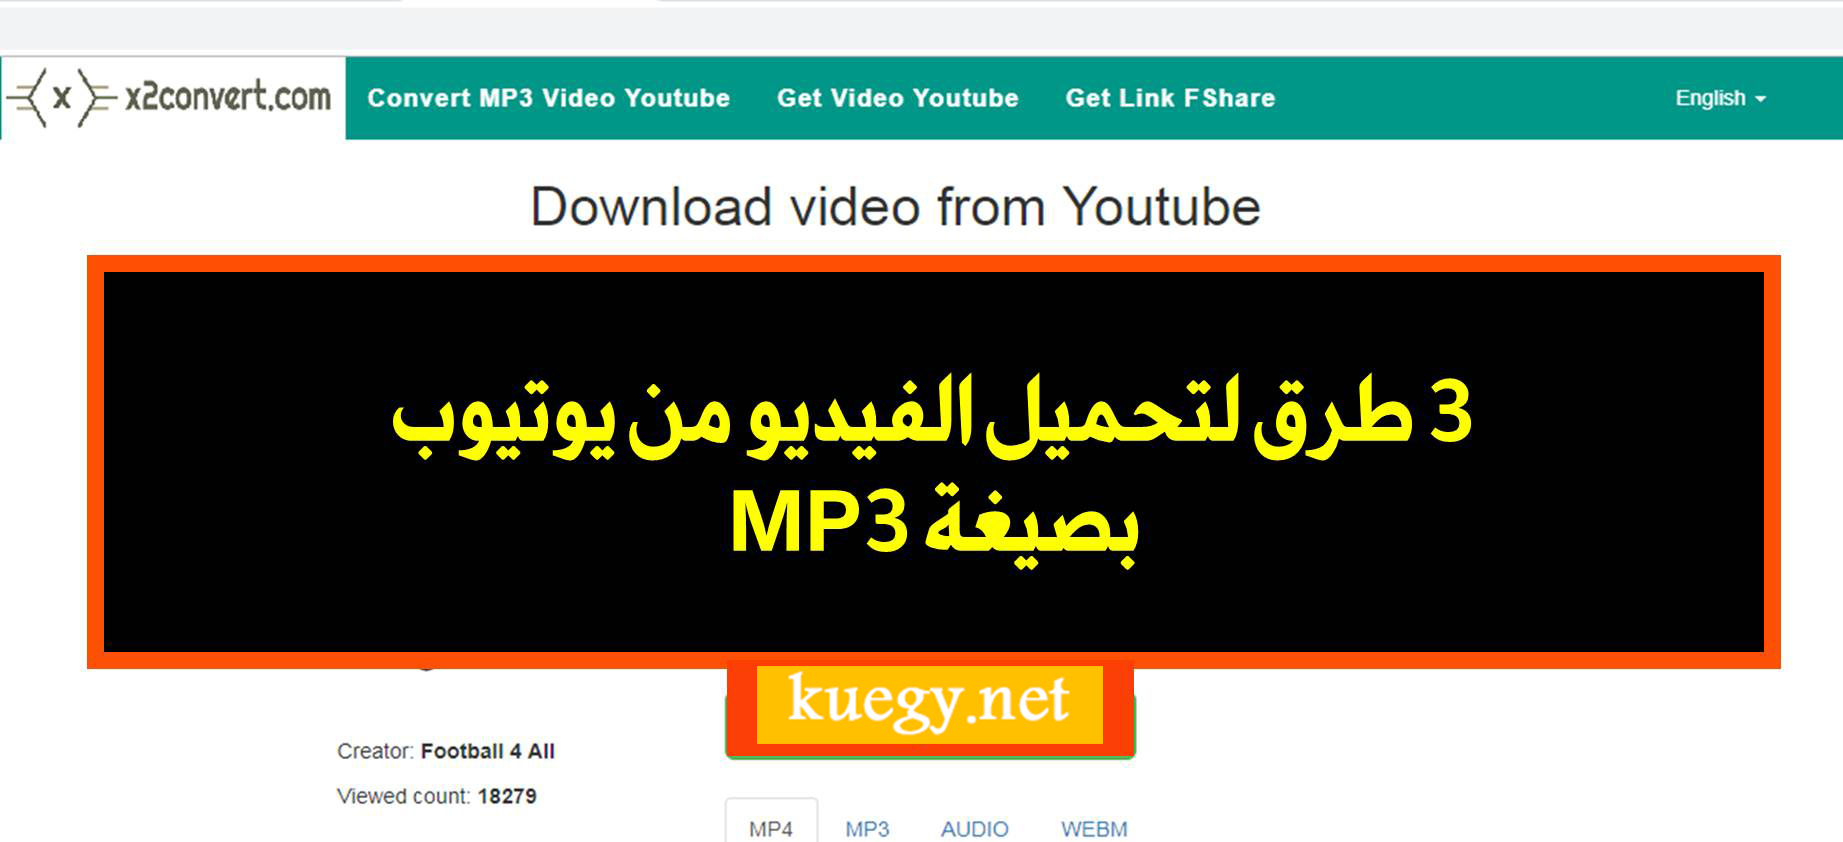 Download From youtube MP33 1